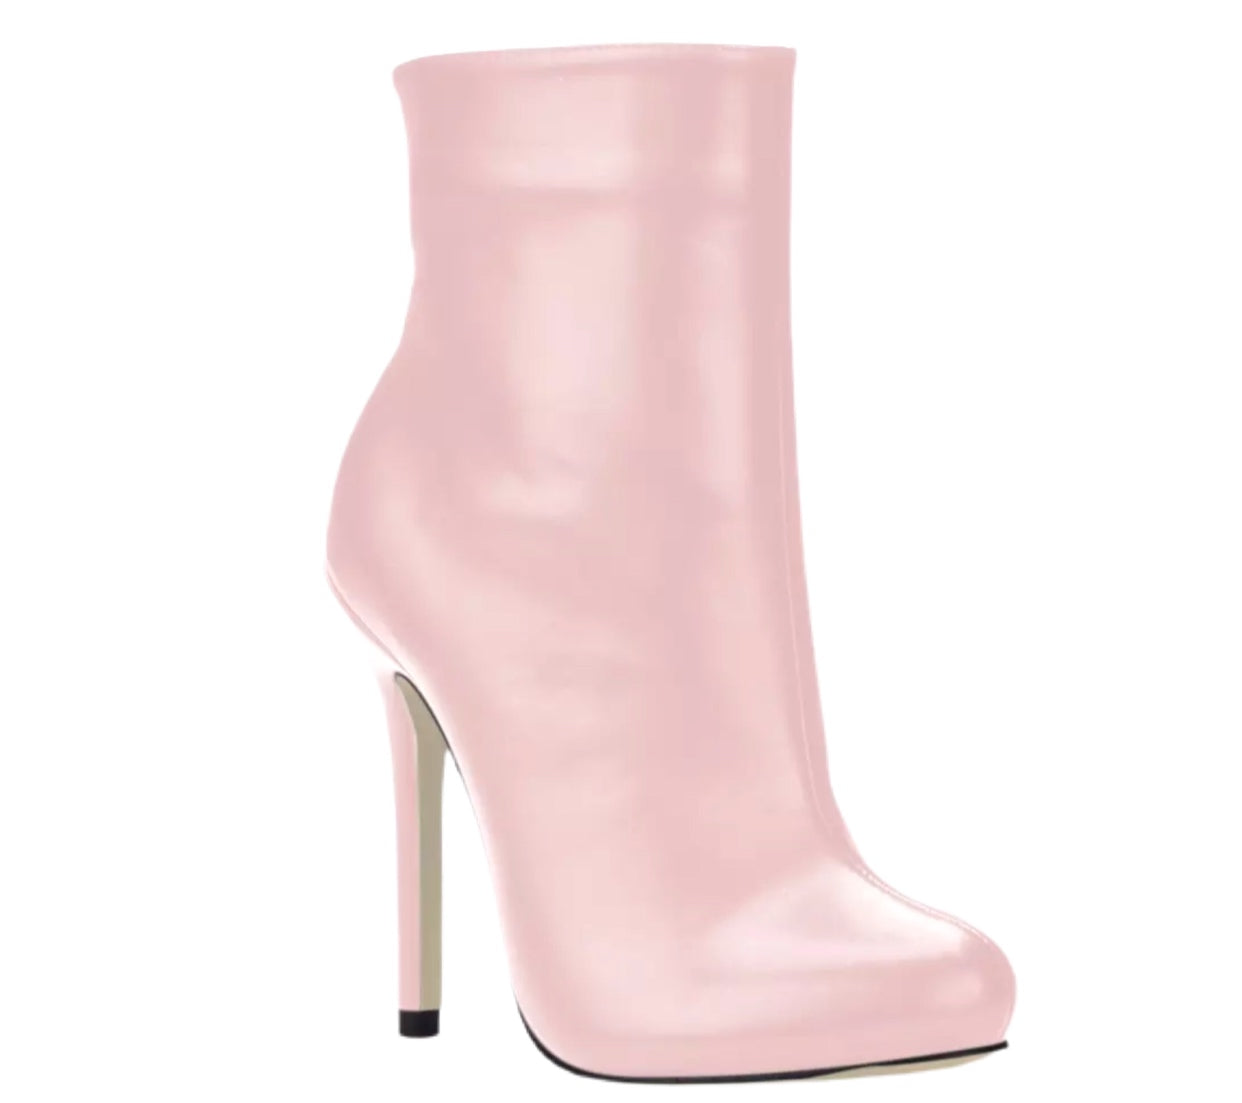 Doll Booties - Light pink